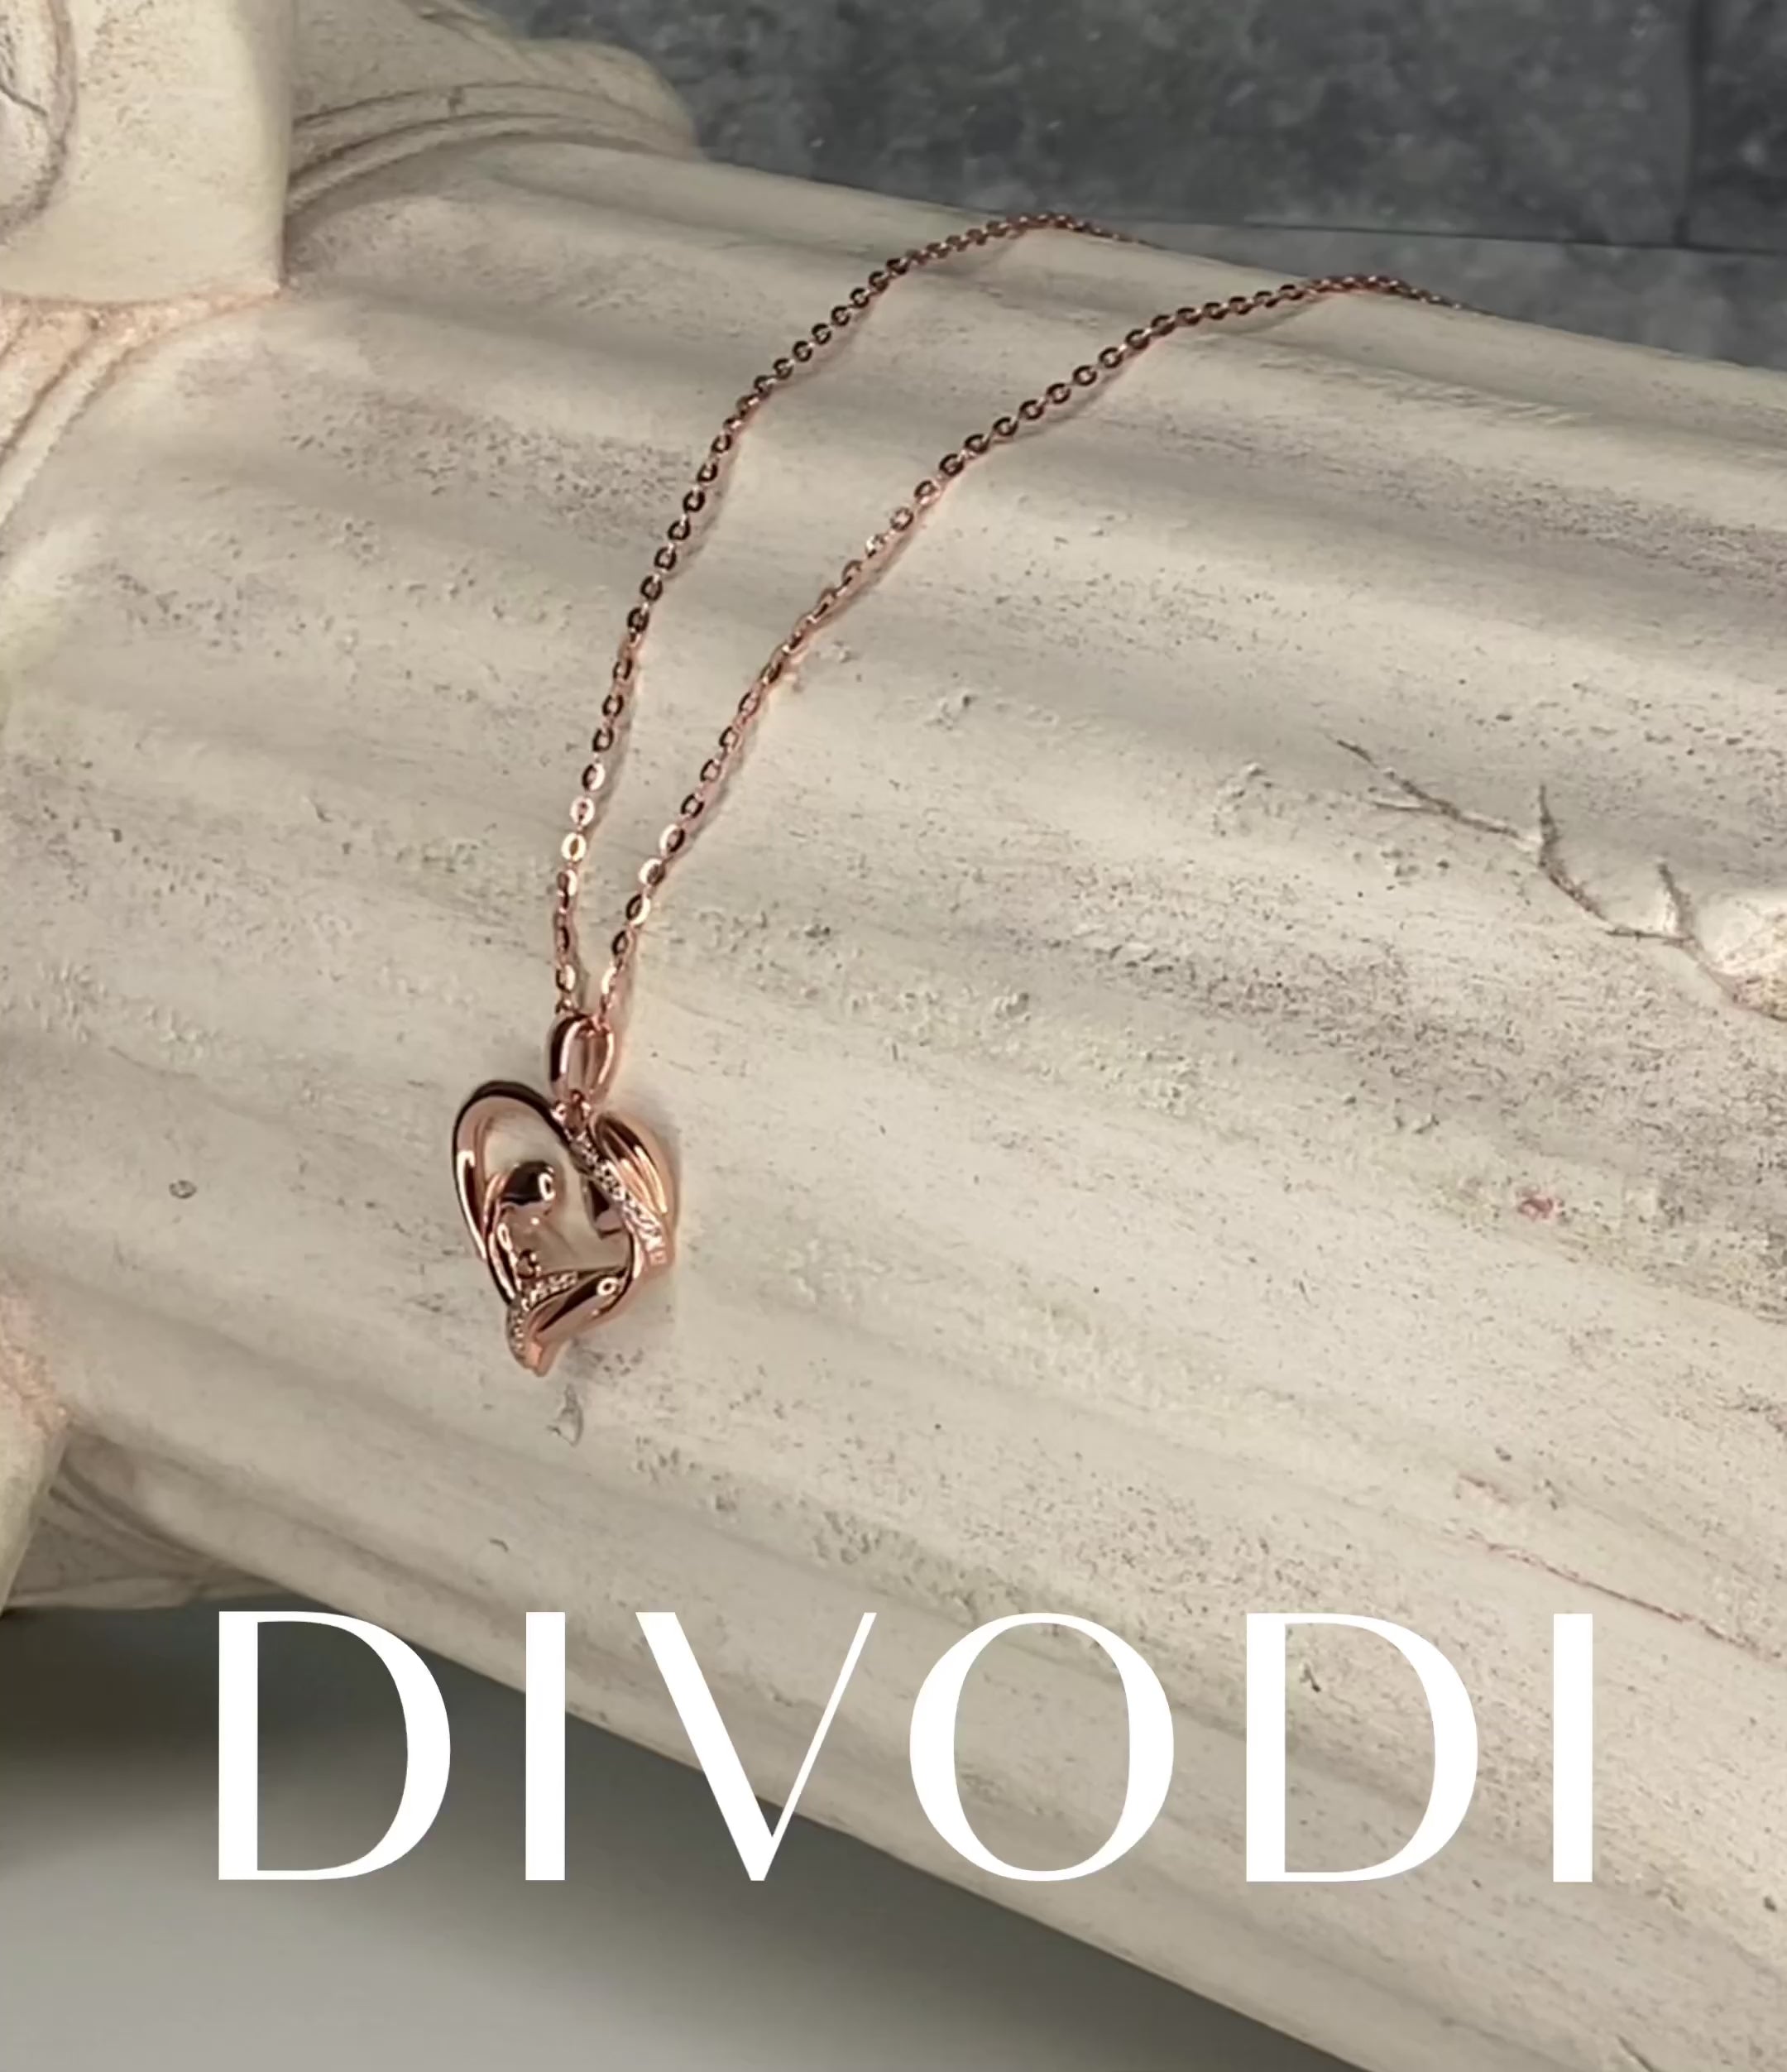 Rose Gold Mother & Child Necklace